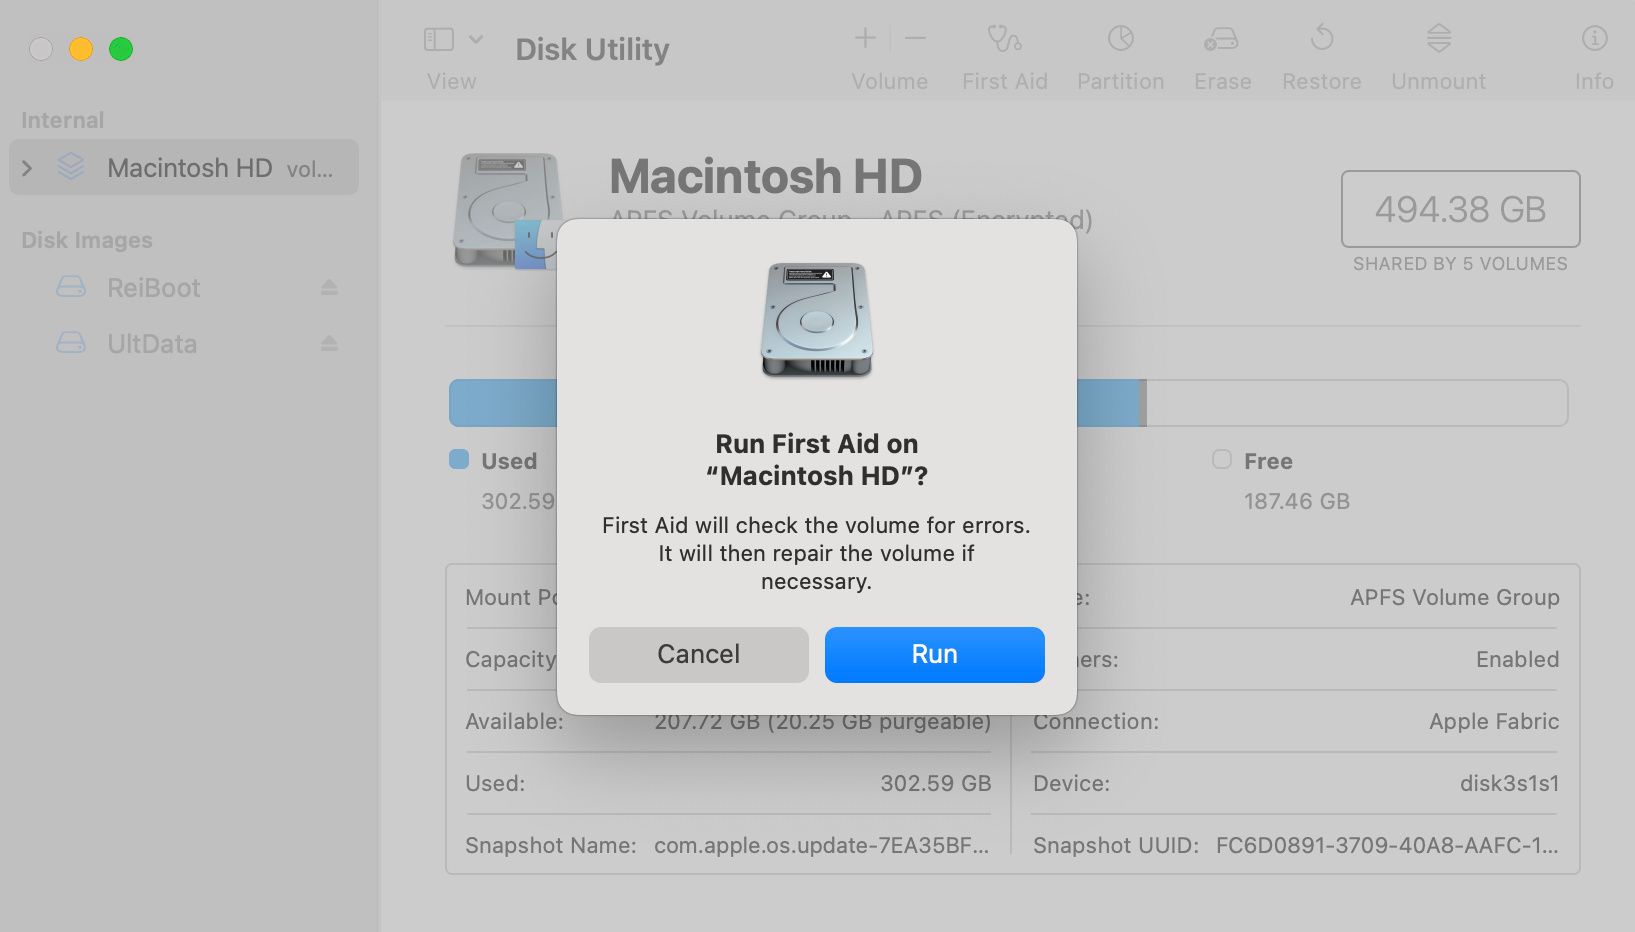 Run First Aid prompt in macOS Disk Utility